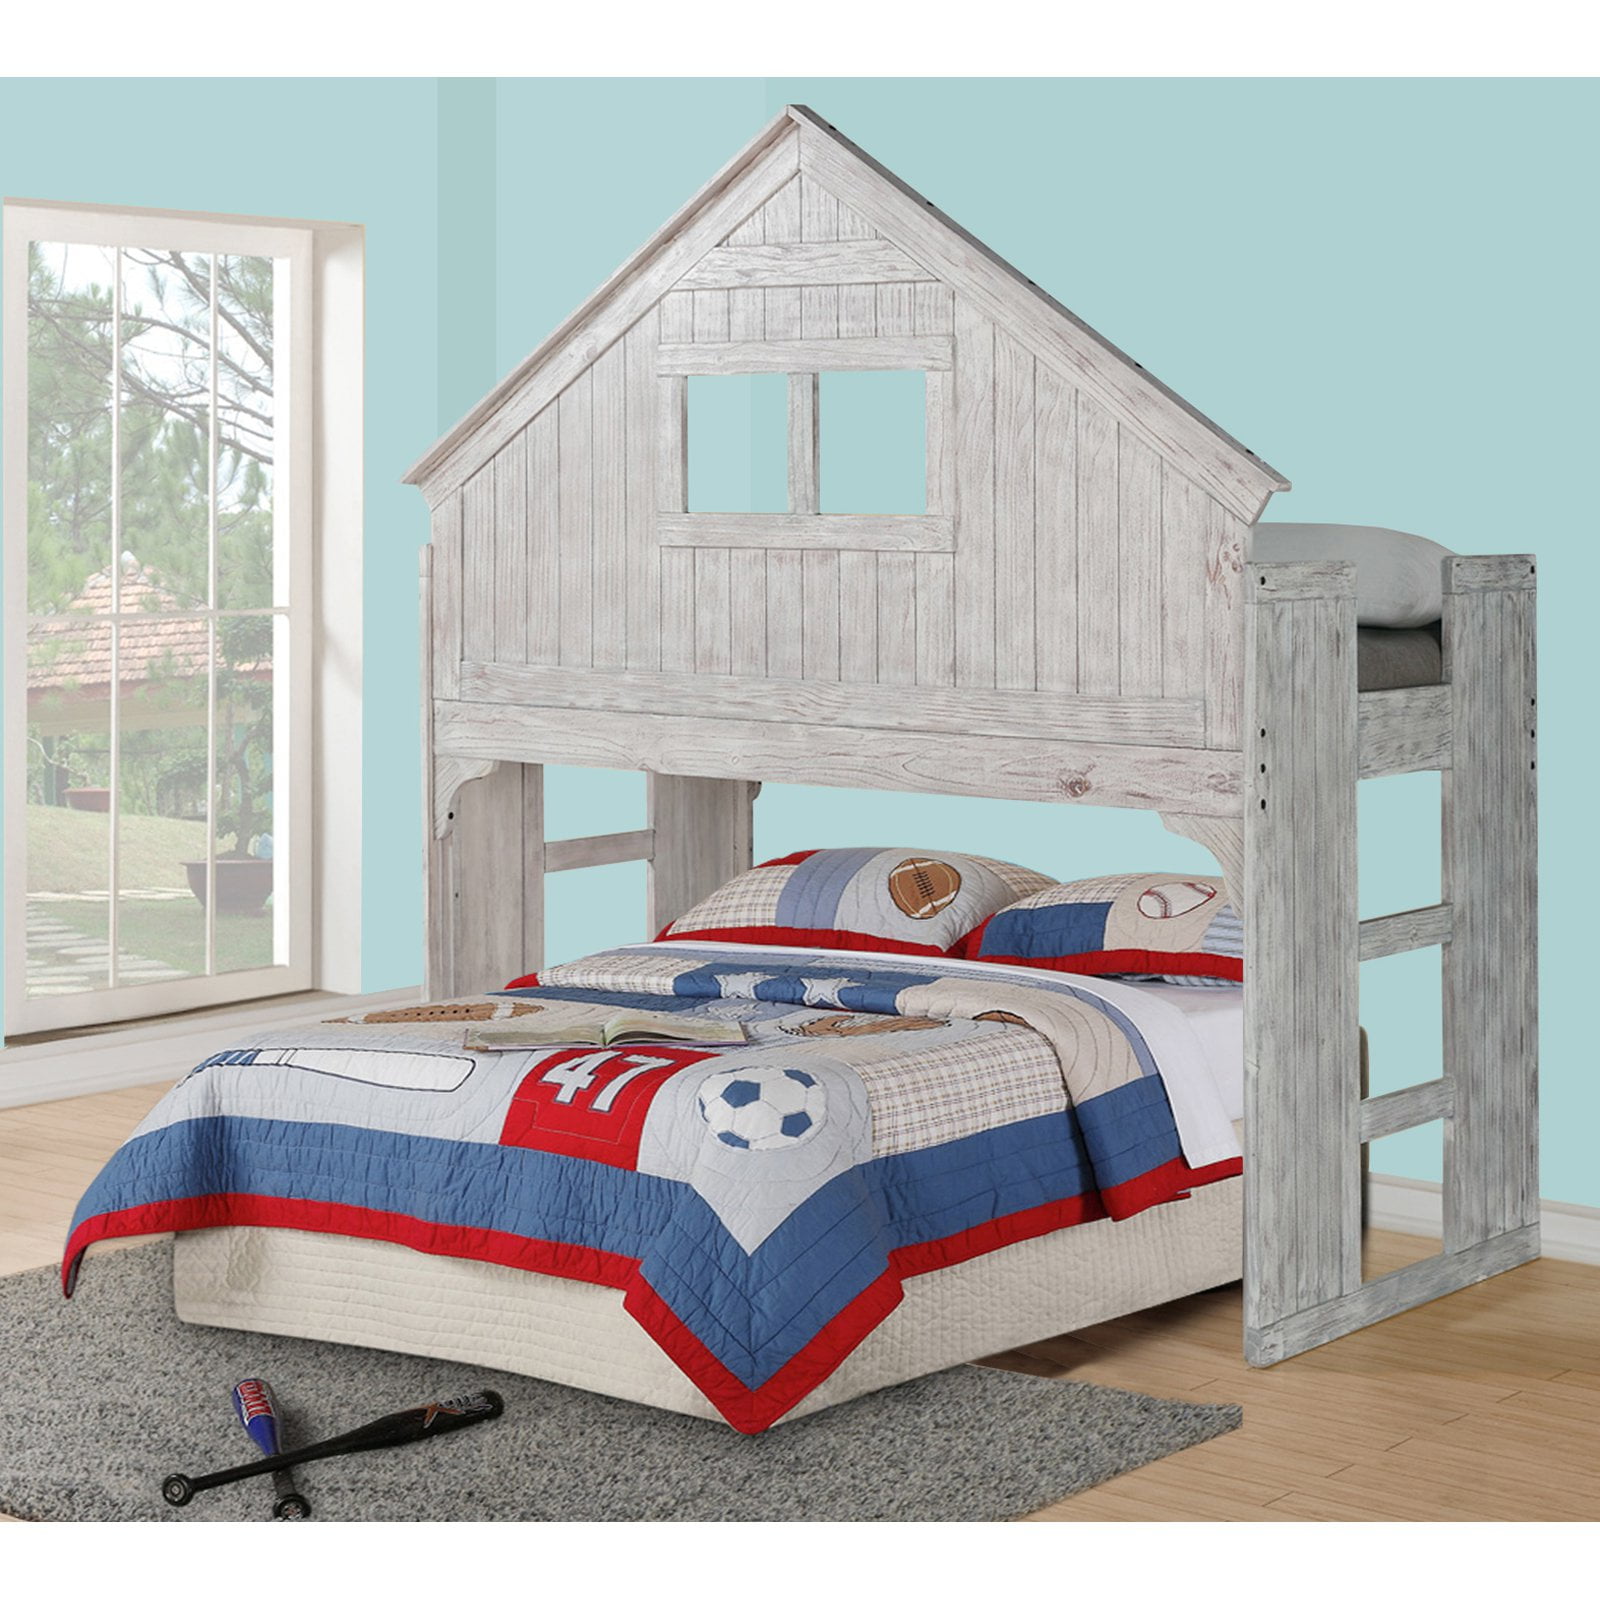 Donco Club House Low Loft Bed, Clubhouse Bunk Bed